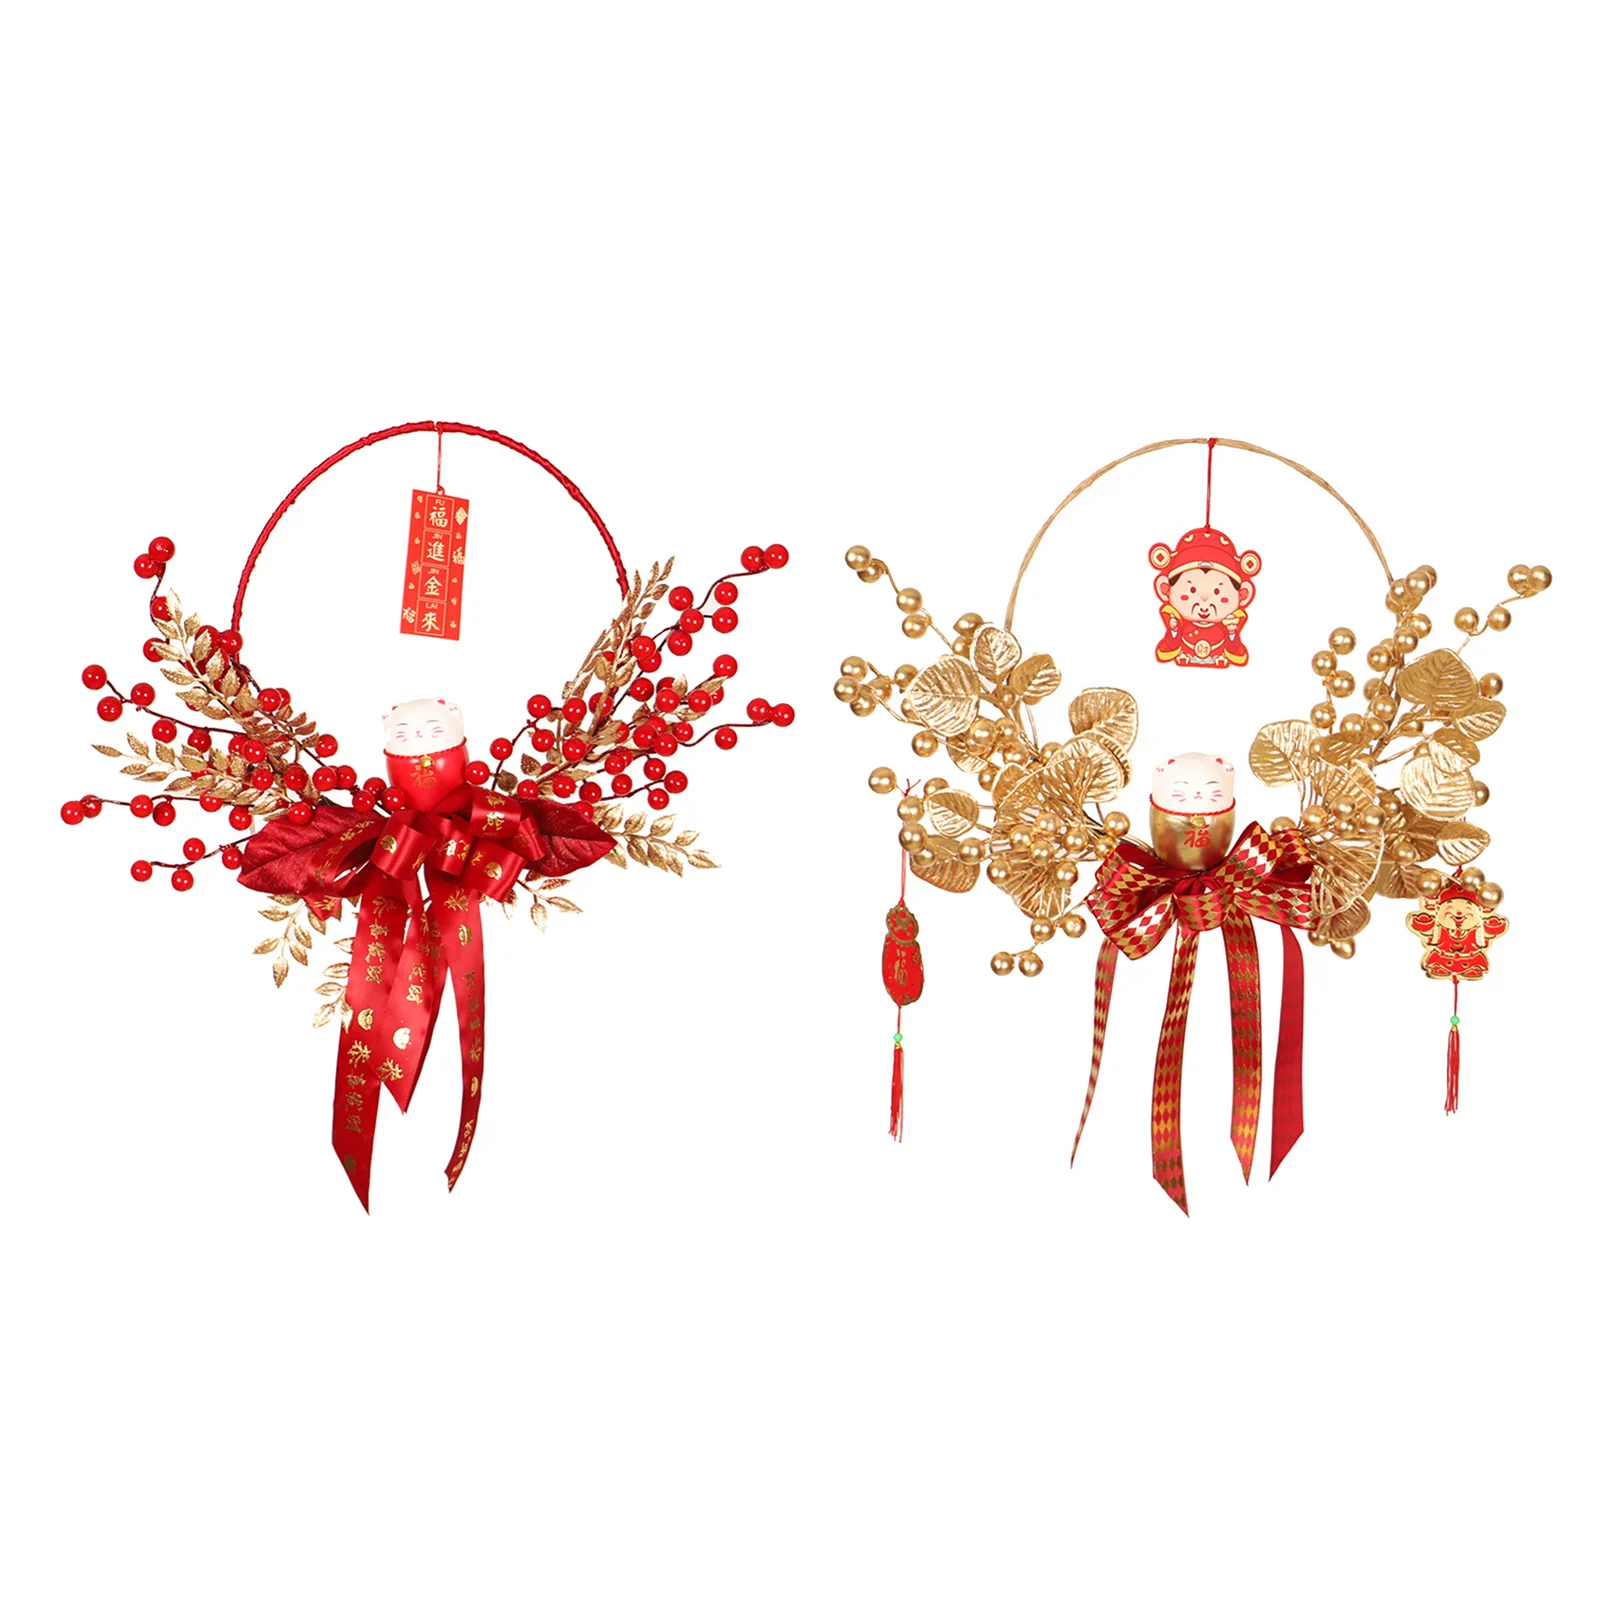 Chinese New Year Decoration Ornamental Berries Wheat Wreath for Celebration Holiday